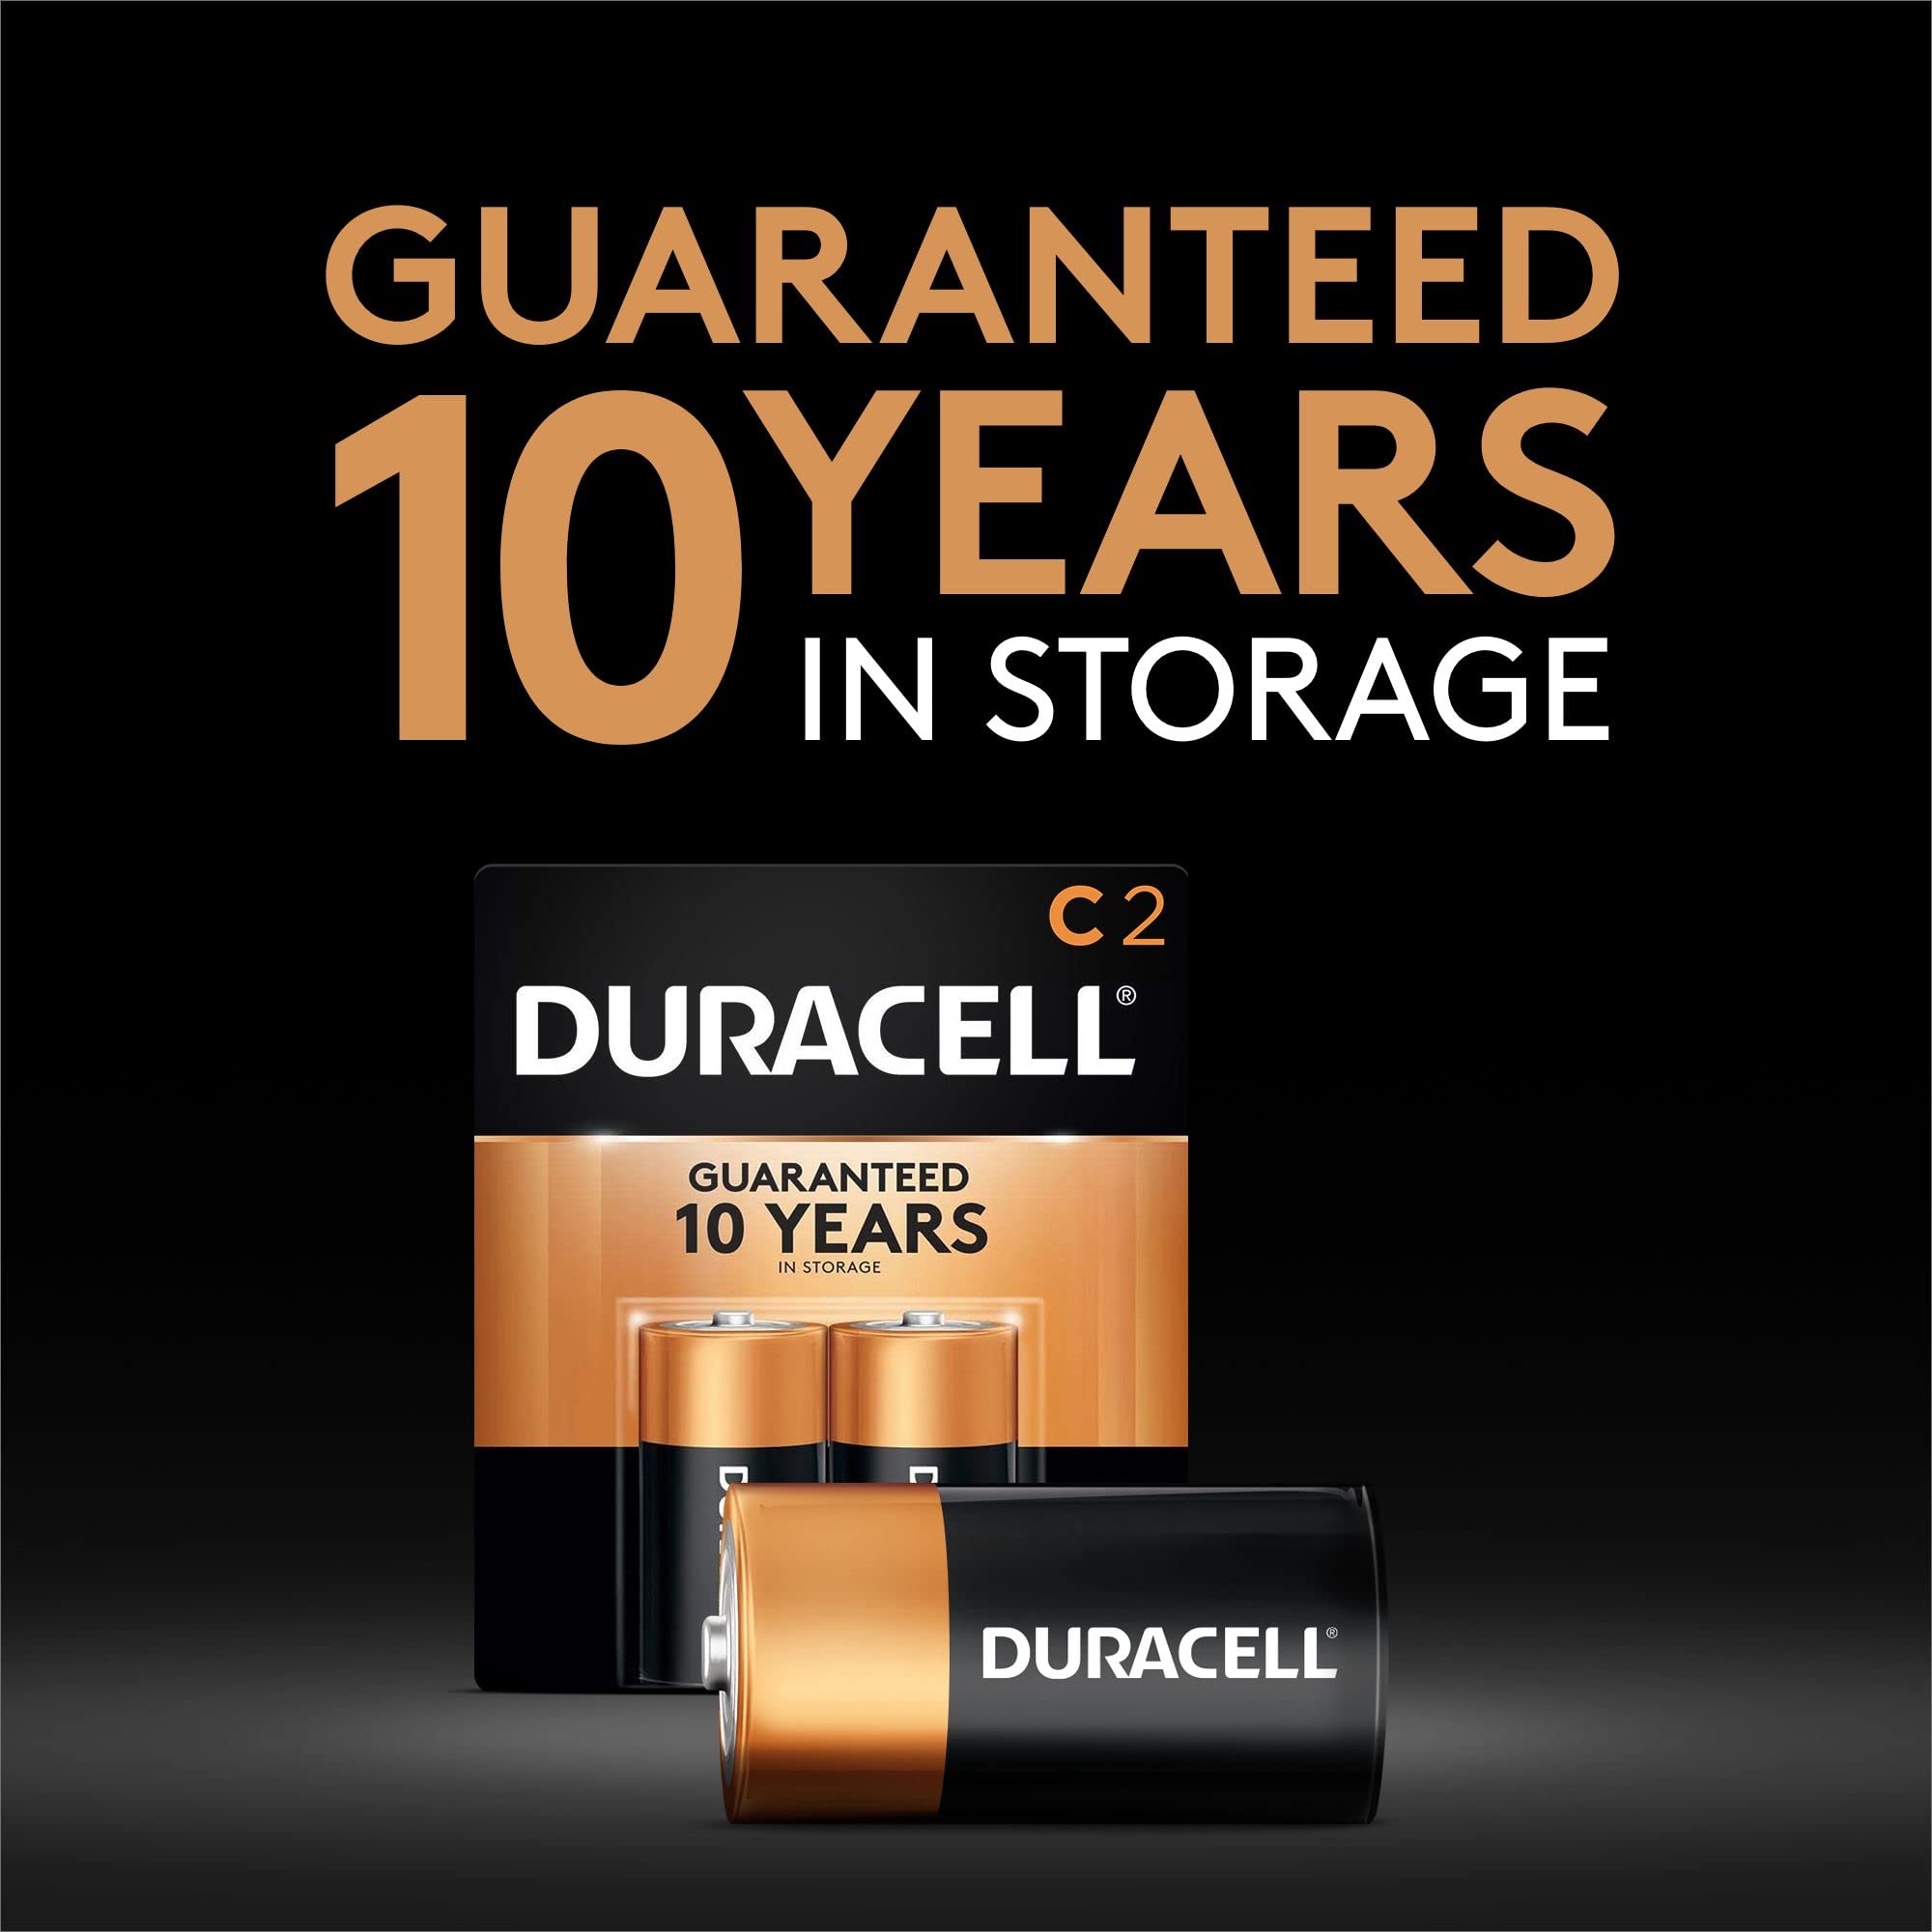 DURACELL Coppertop 1.5V Size C Alkaline Battery, (Pack of 8) - image 3 of 5